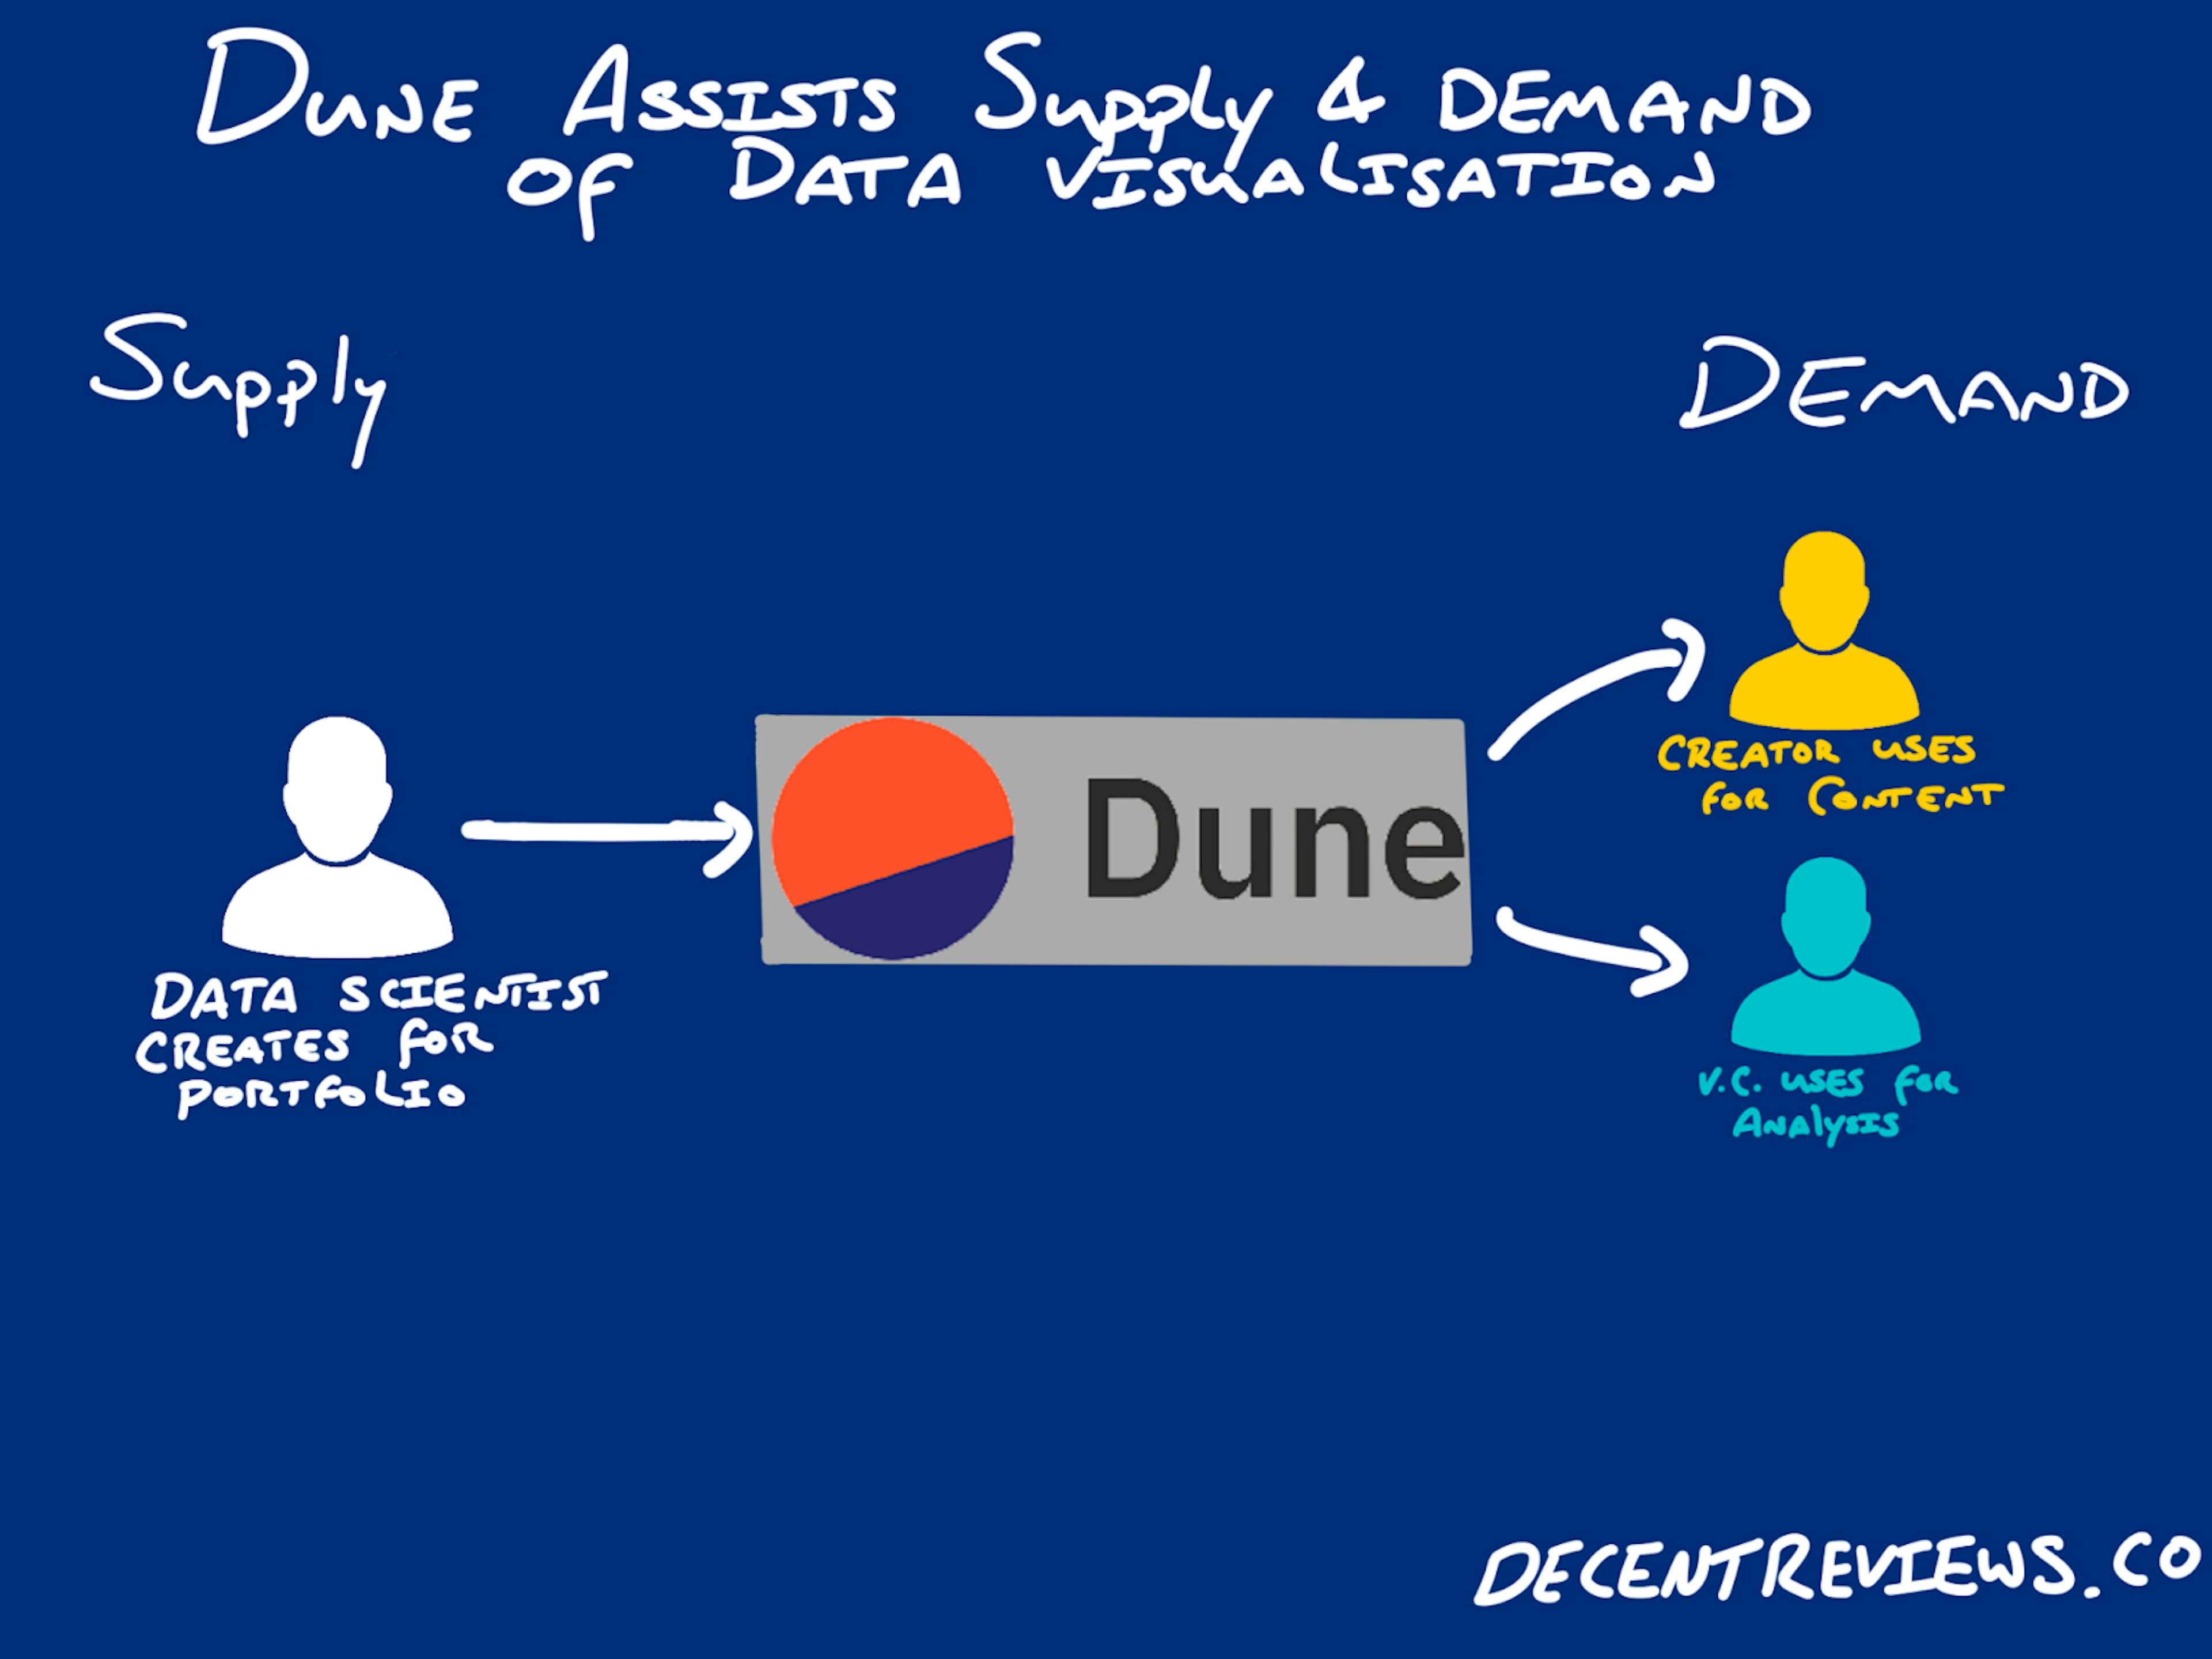 Dune analytics assists both supply and demand of Web3 data